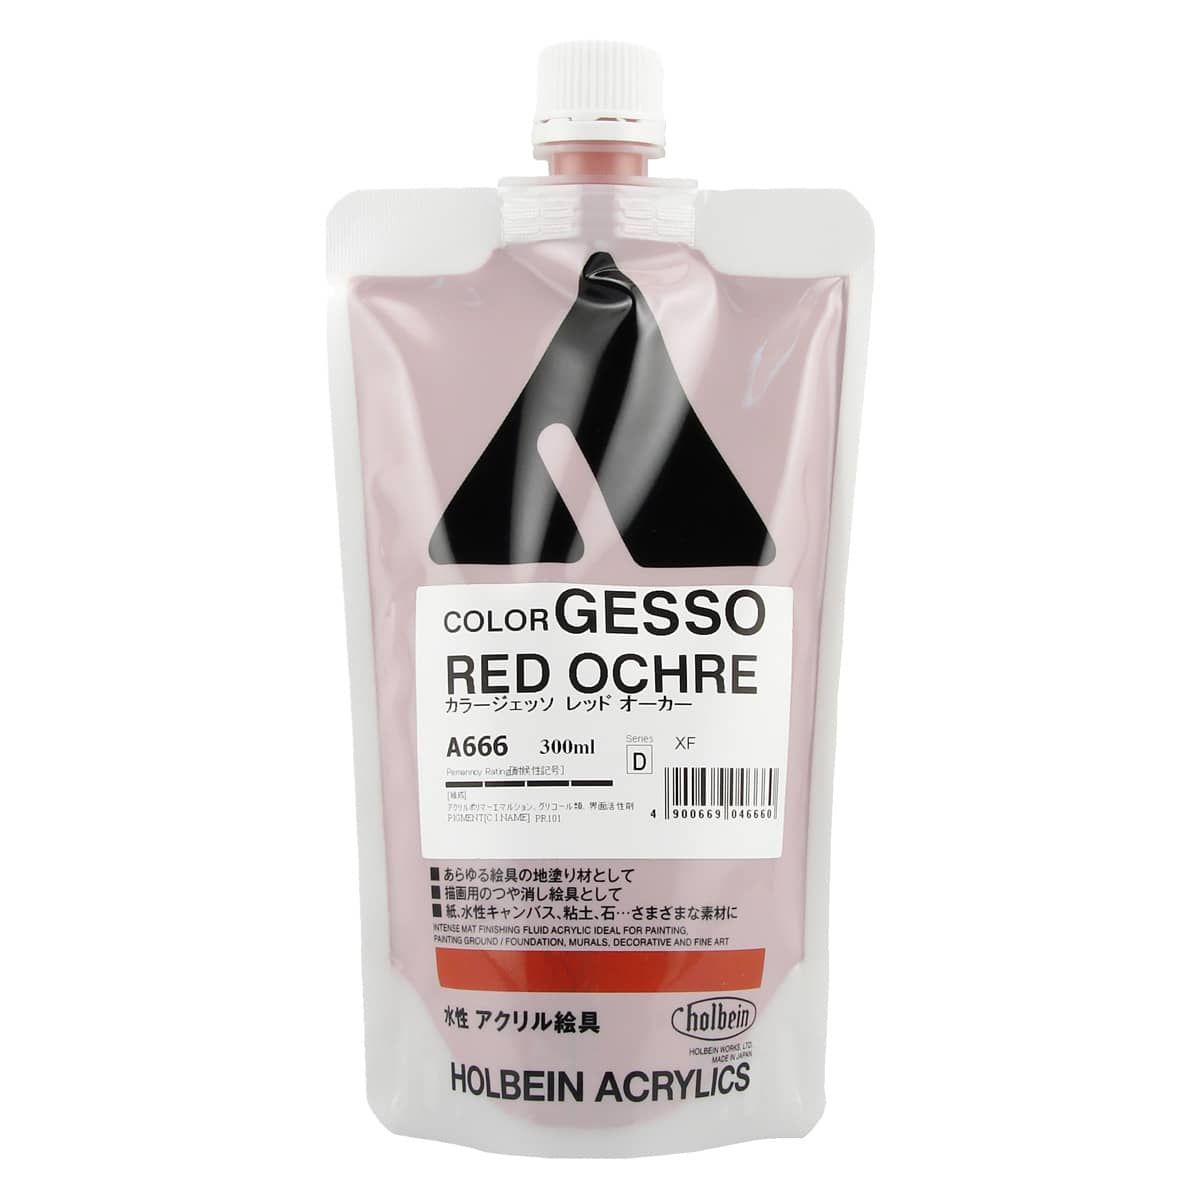 Holbein Acrylic Colored Gesso 300ml Red Ochre